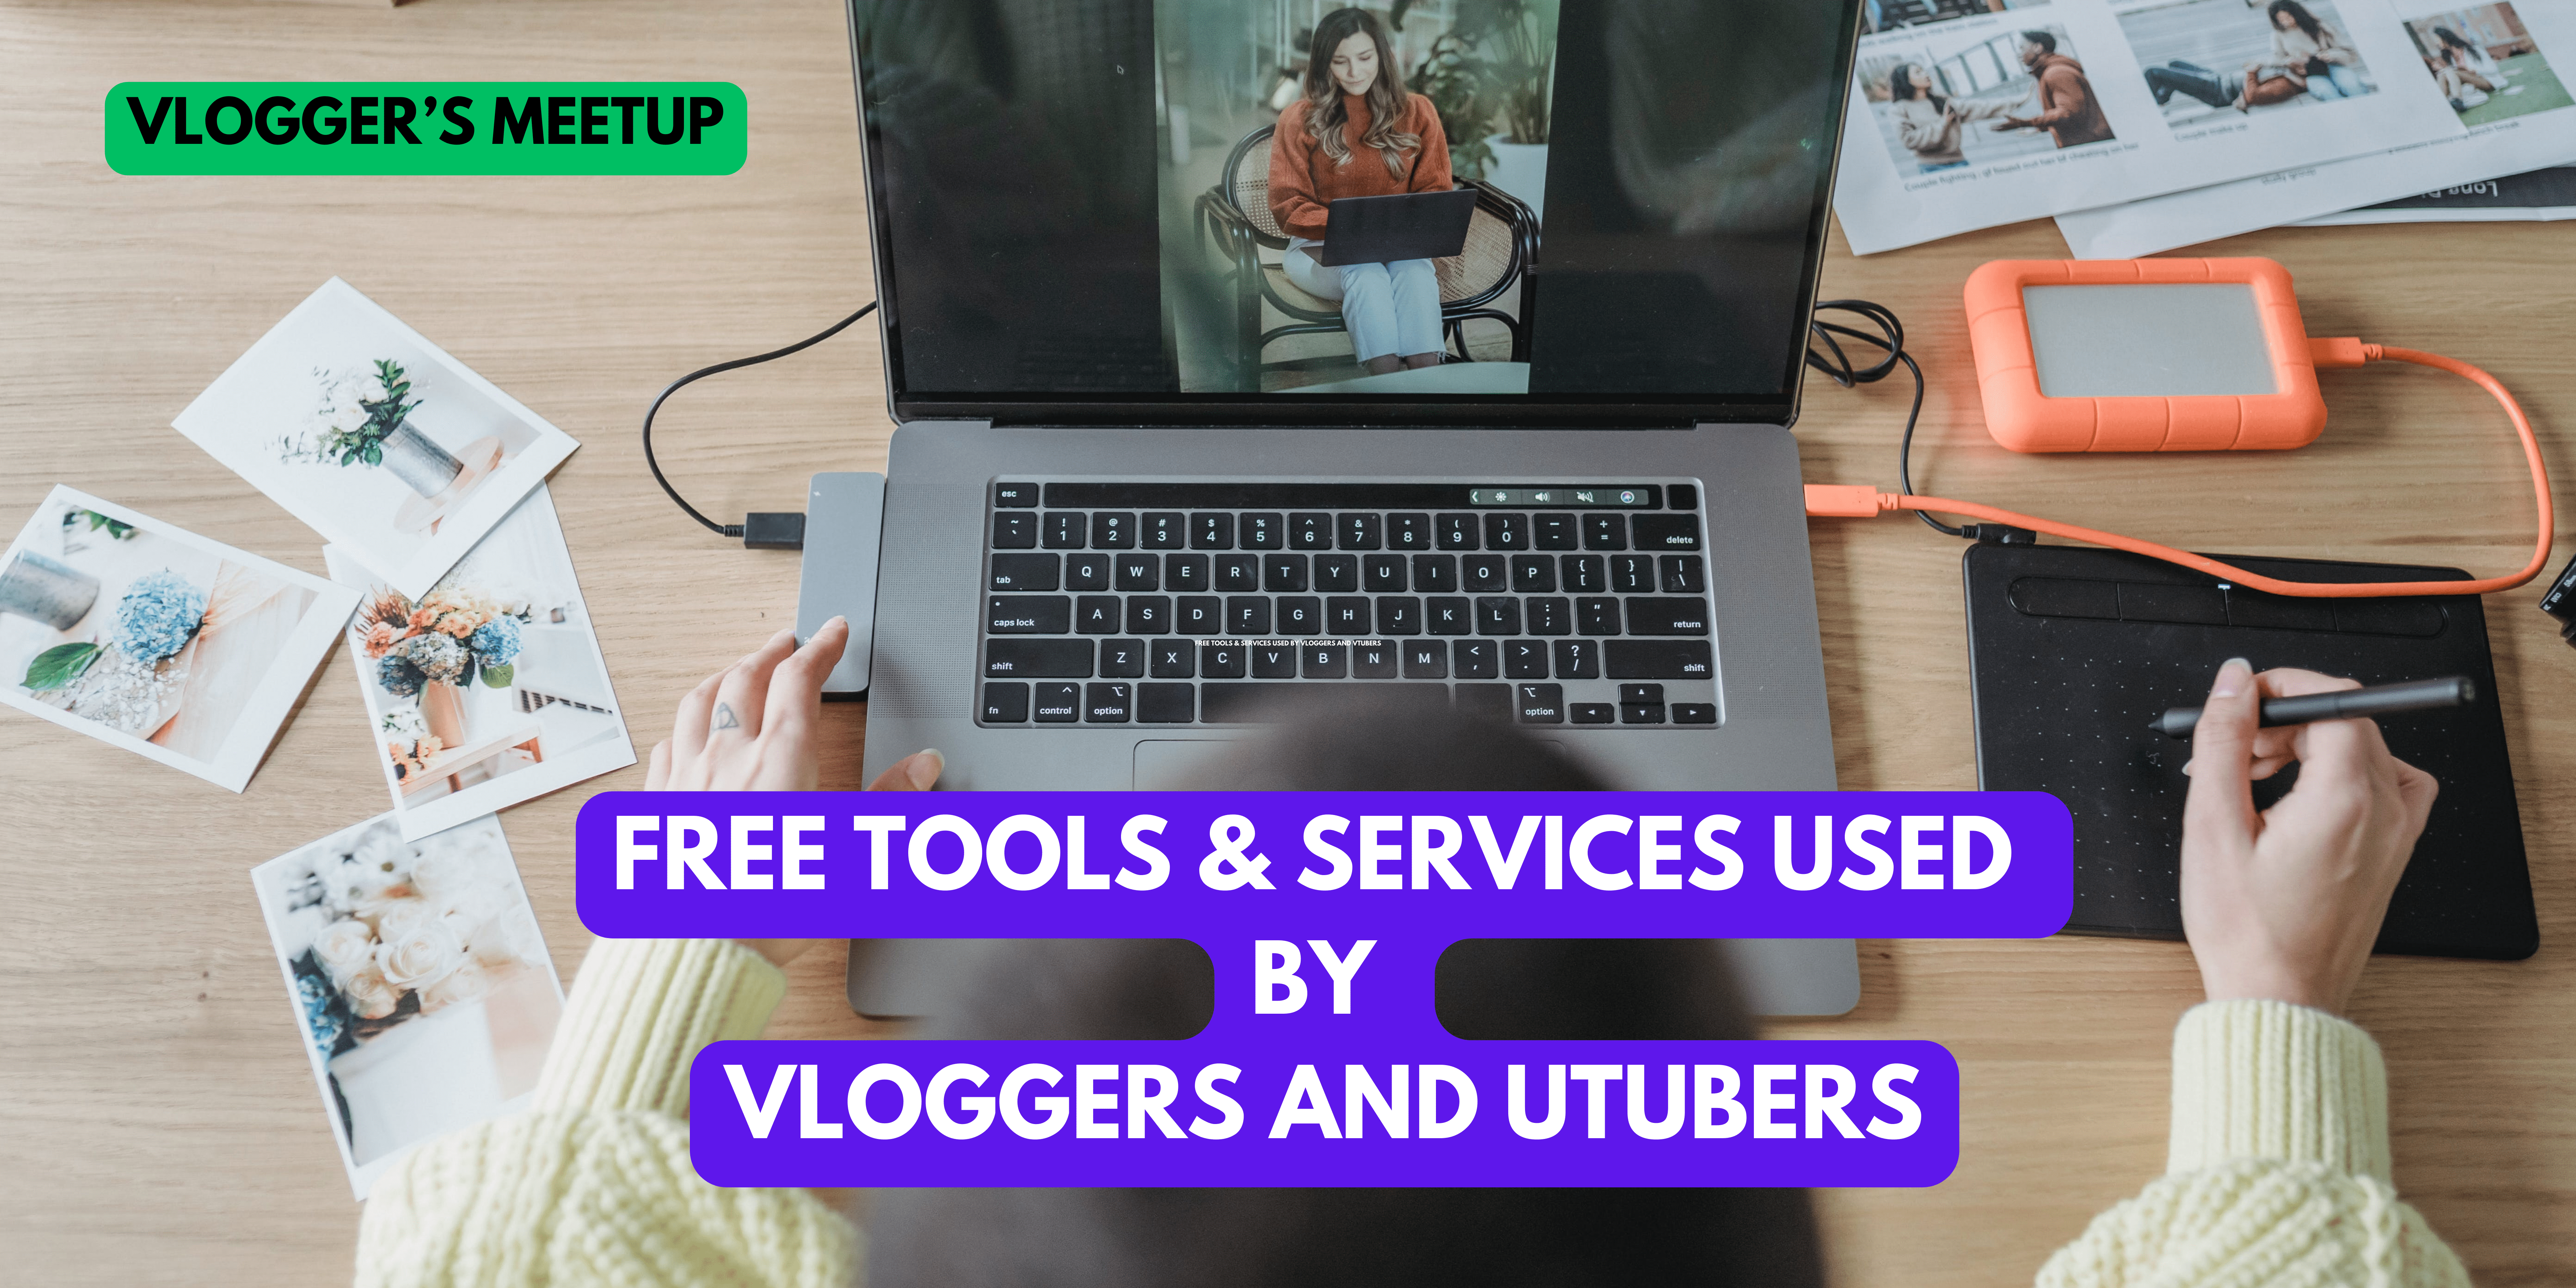 Free Tools & Services used by Vloggers and Vtubers